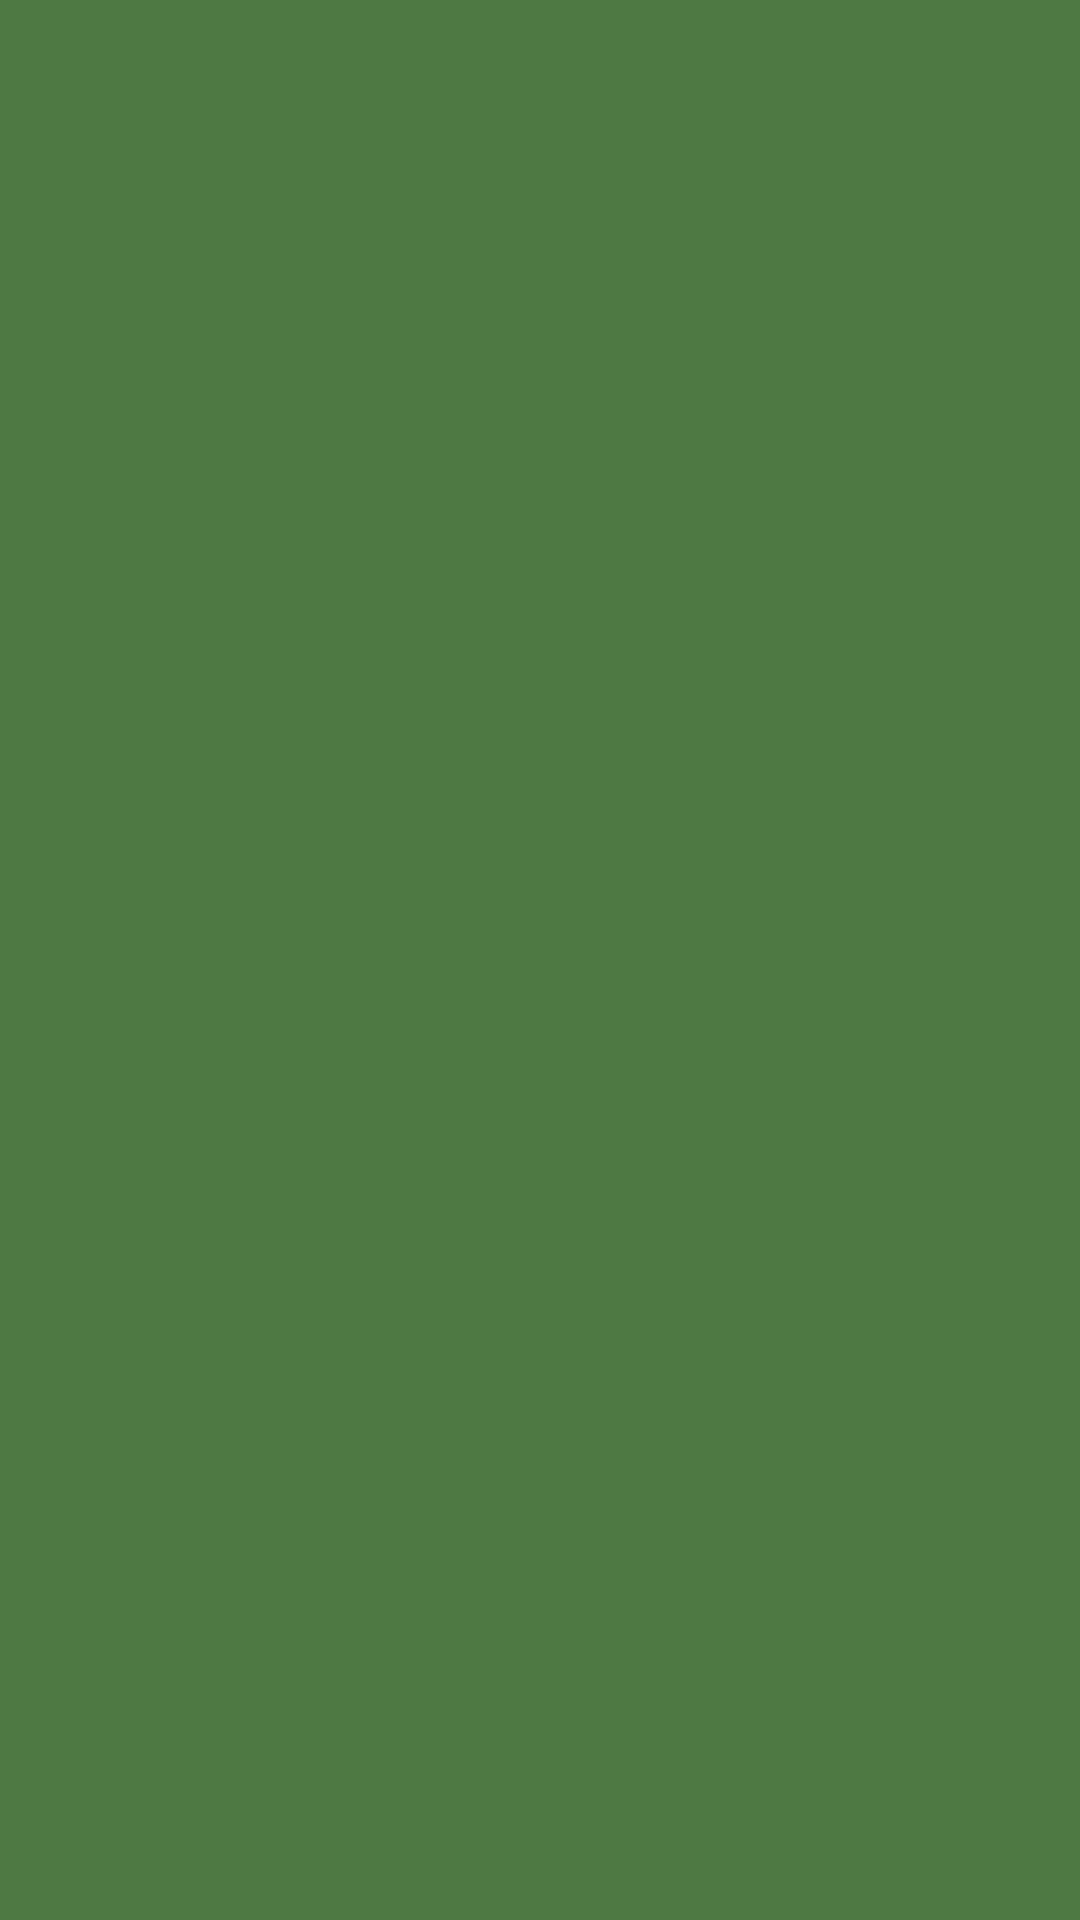 1080x1920 Fern Green Solid Color Background